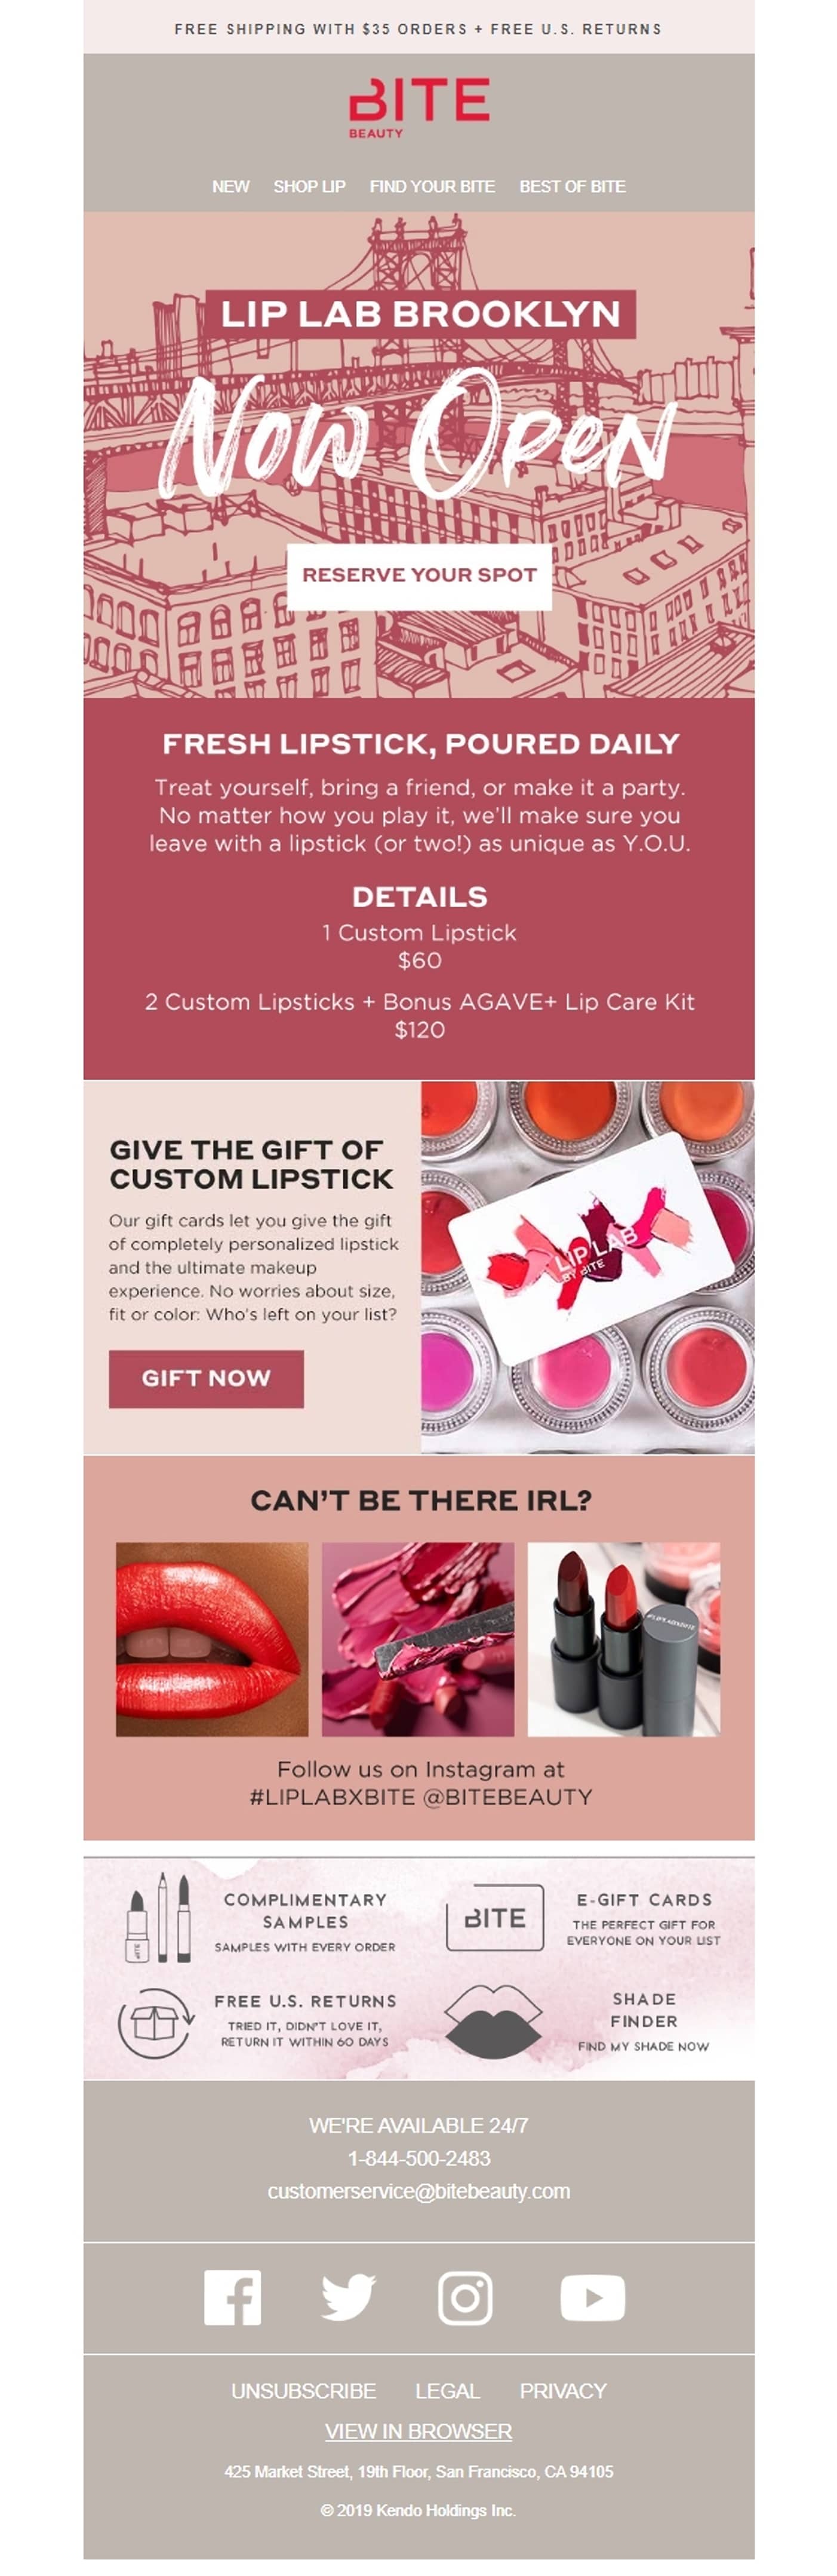 Event announcement email from Bite Beauty